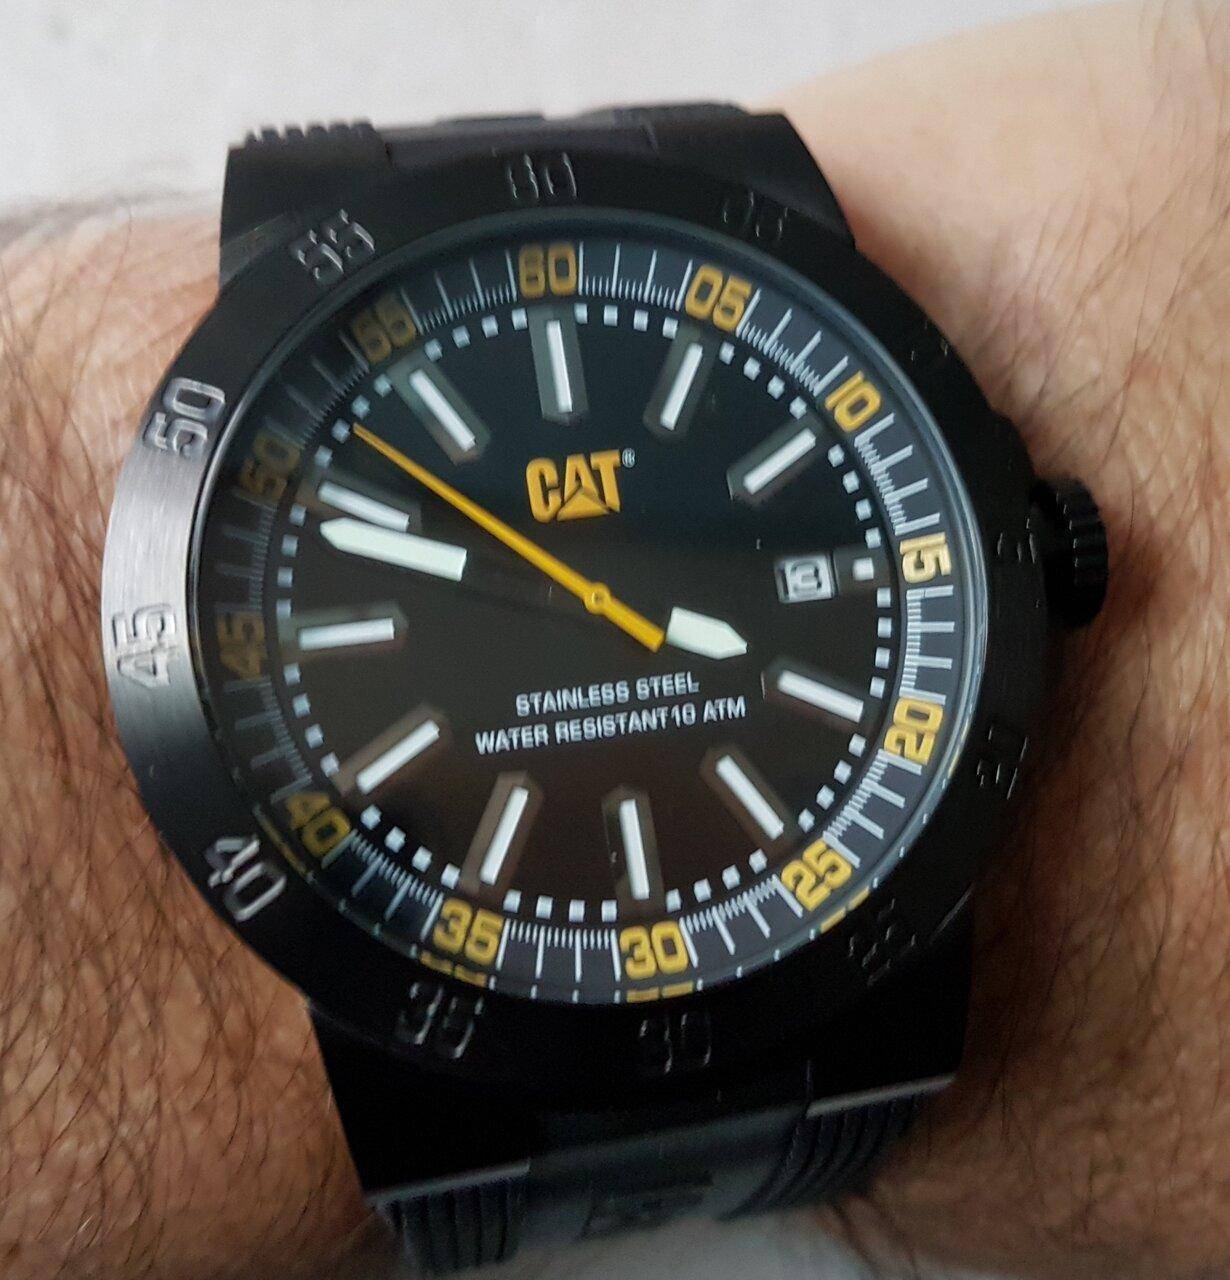 CAT Cosmofit 2012 Mens Rubber Date Watch YP.161.21.124 (2012).jpg